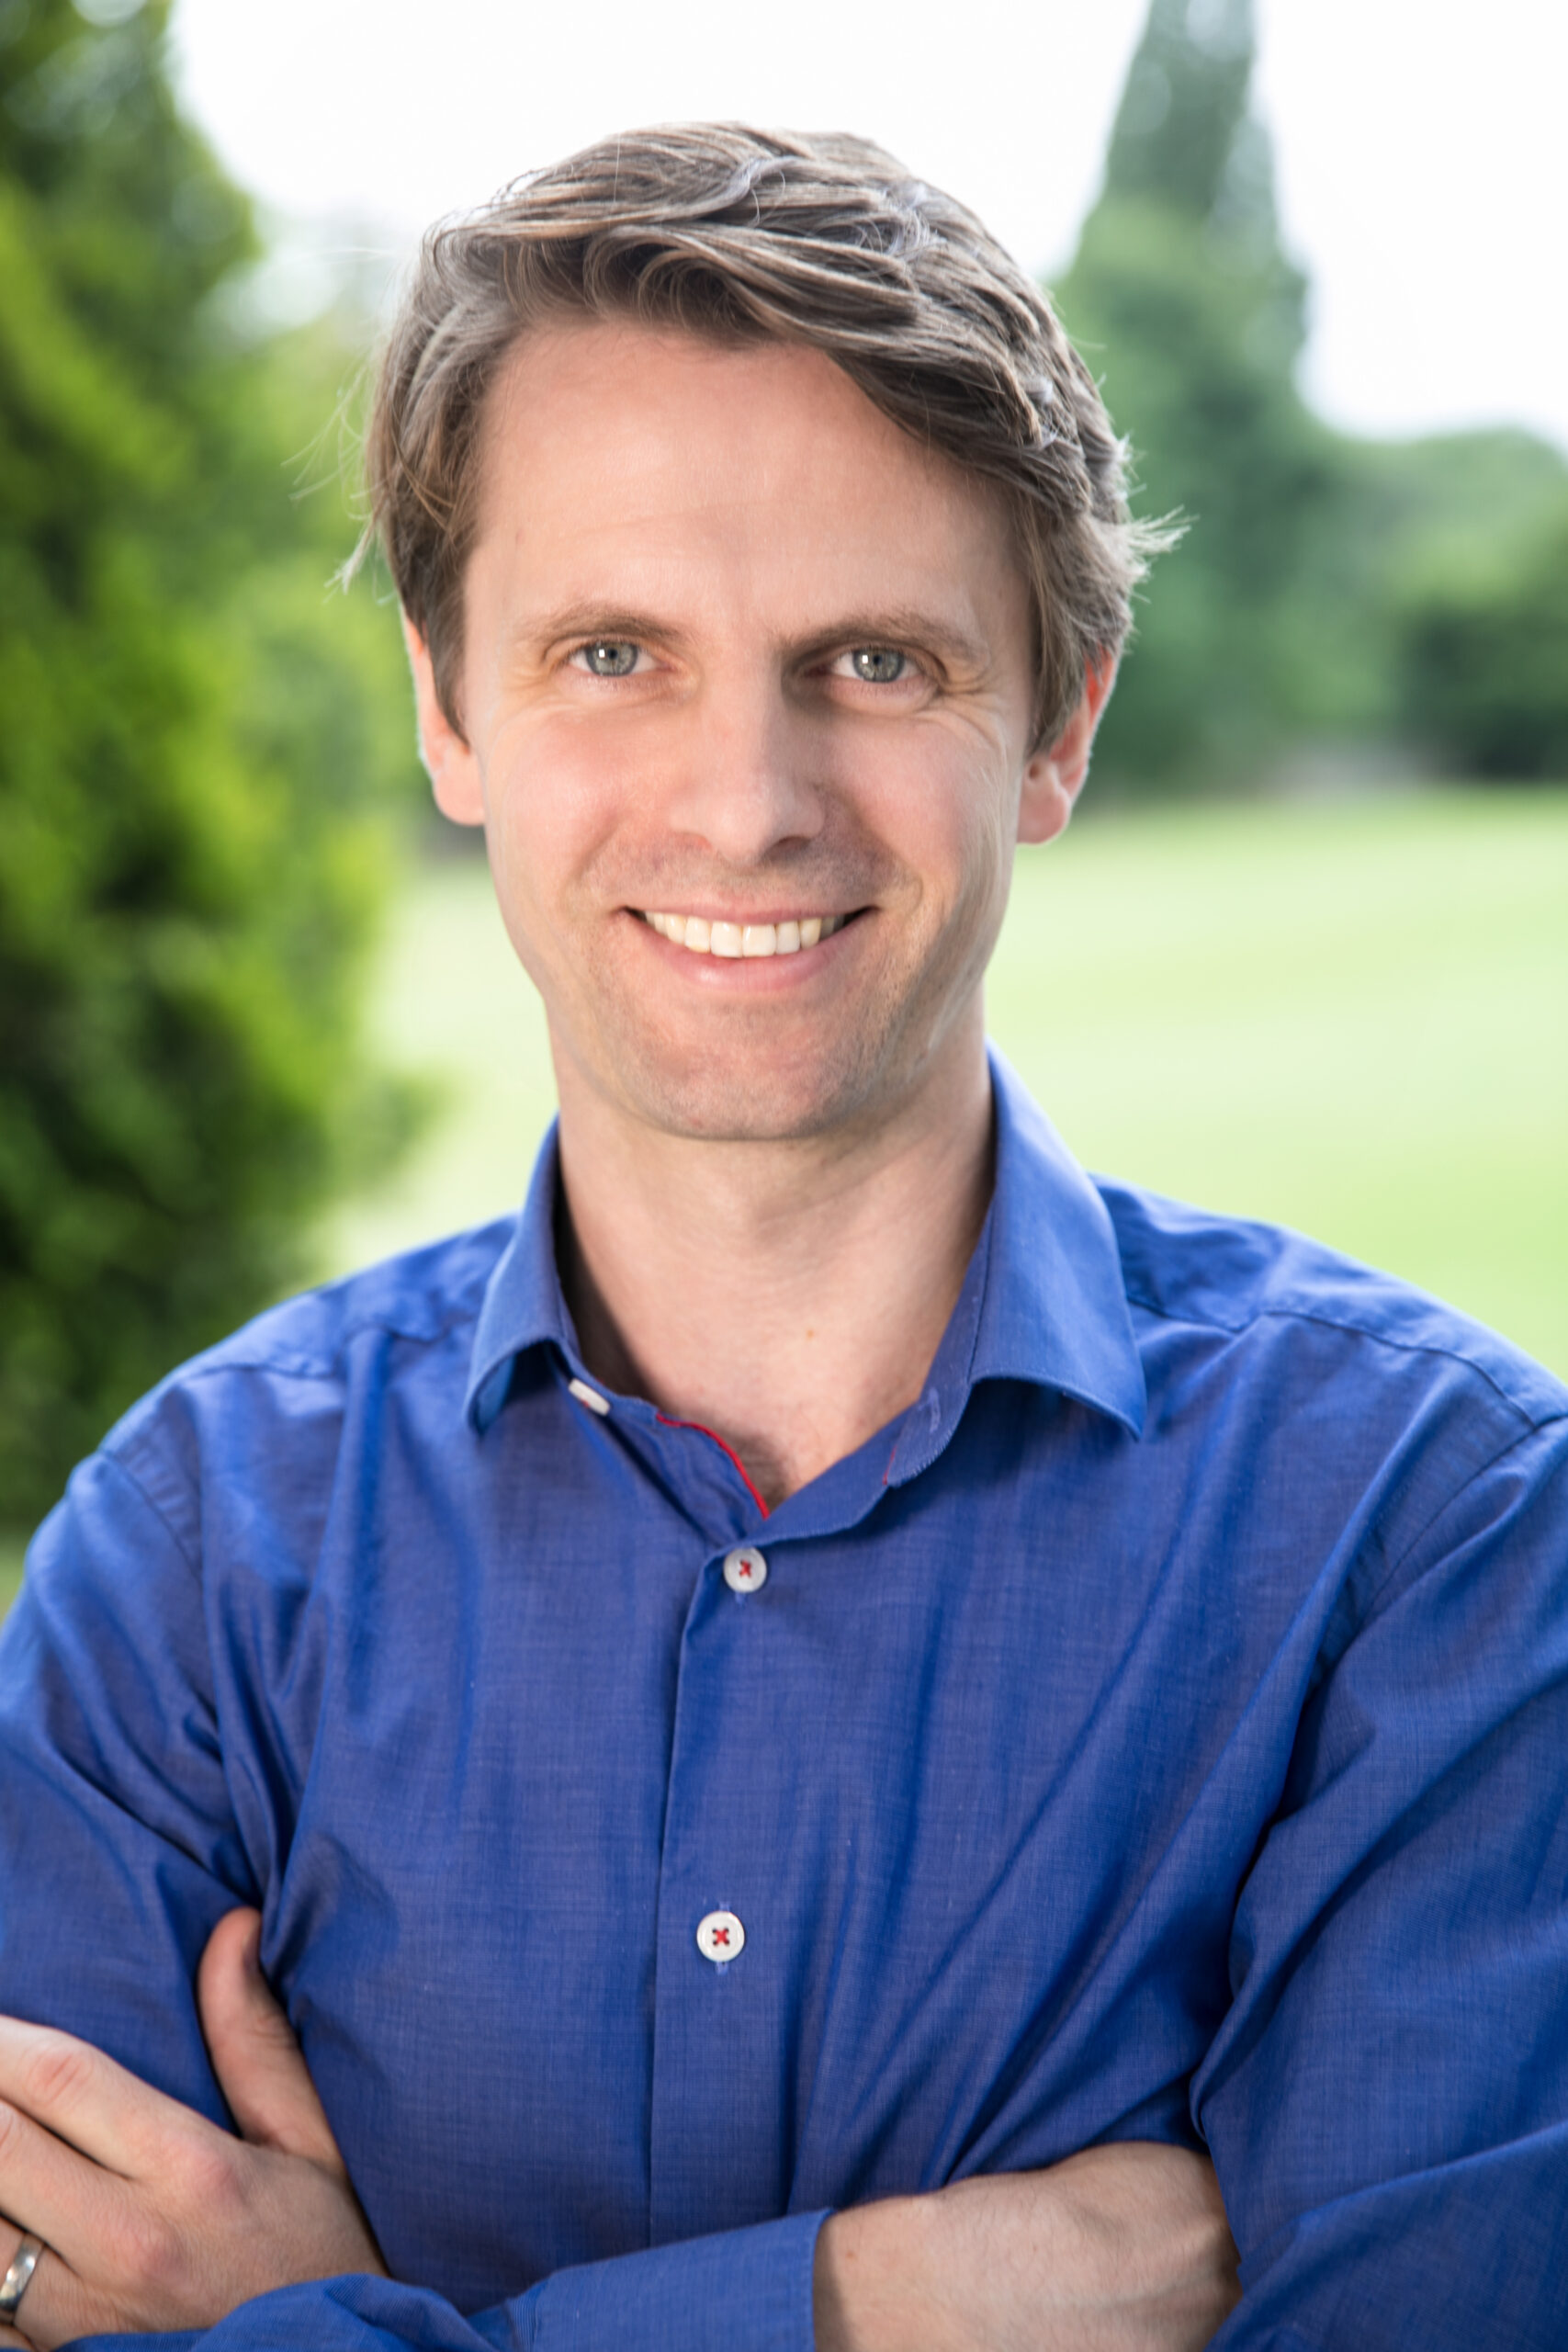 Corporate headshot of a brown haired man in a blue shirt